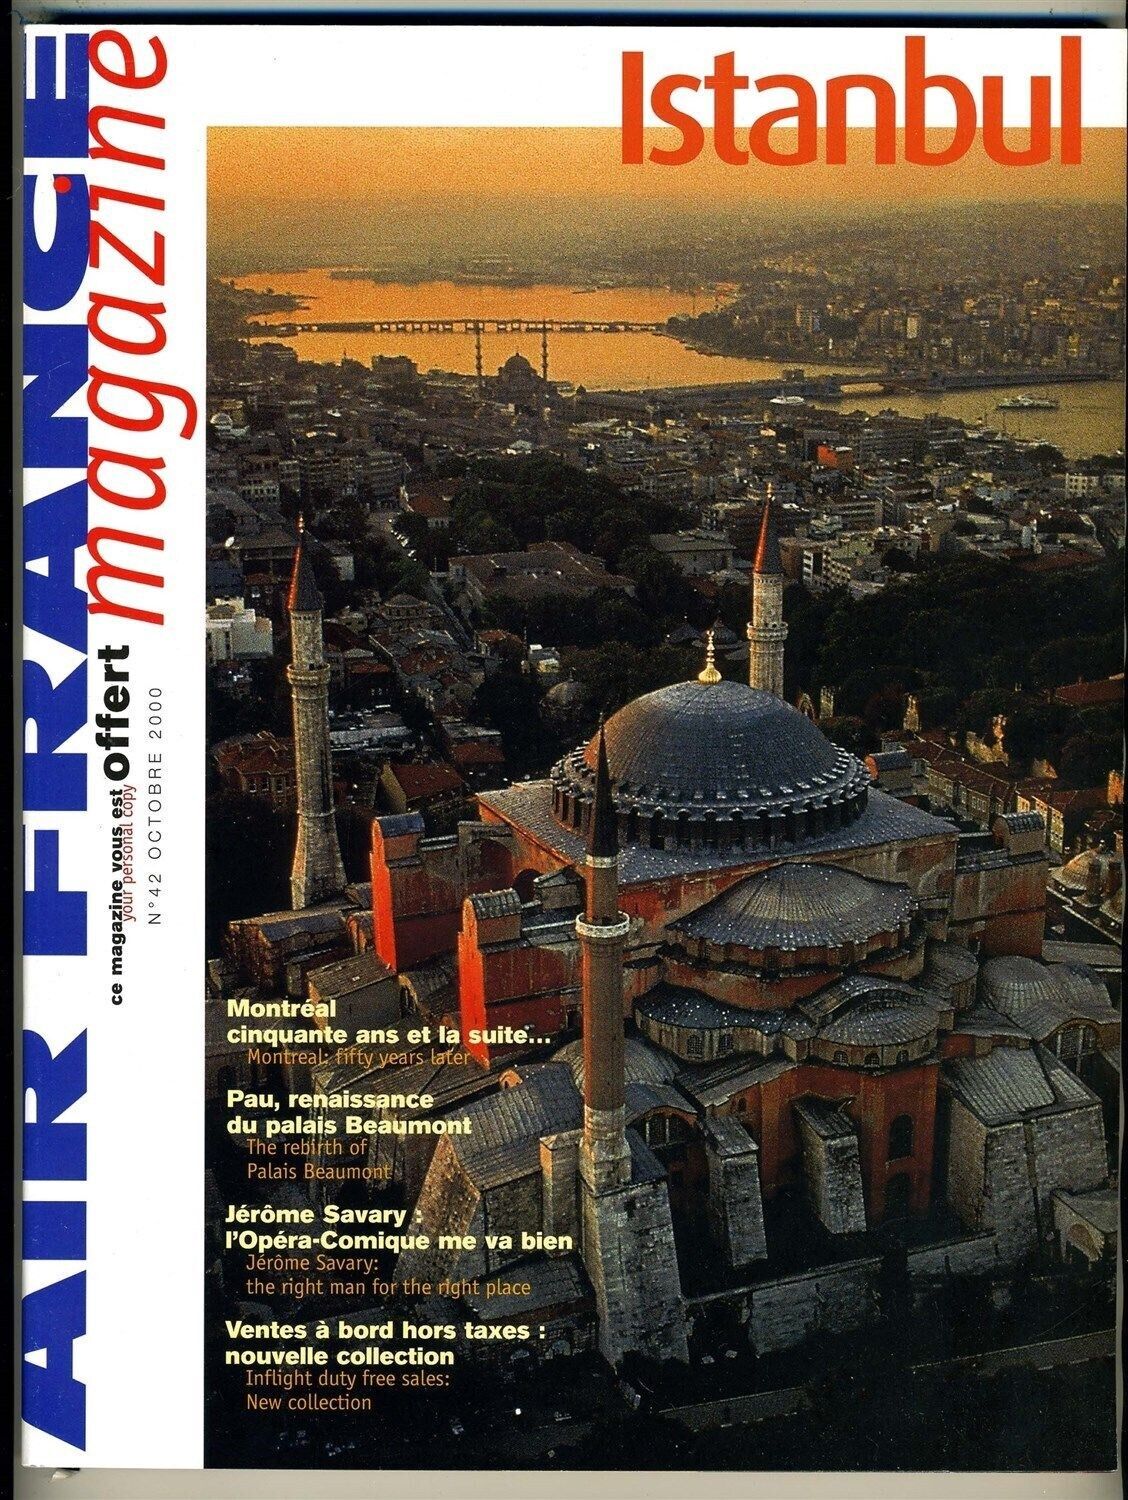 Air France In Flight Magazine October 2000 Istanbul Cover